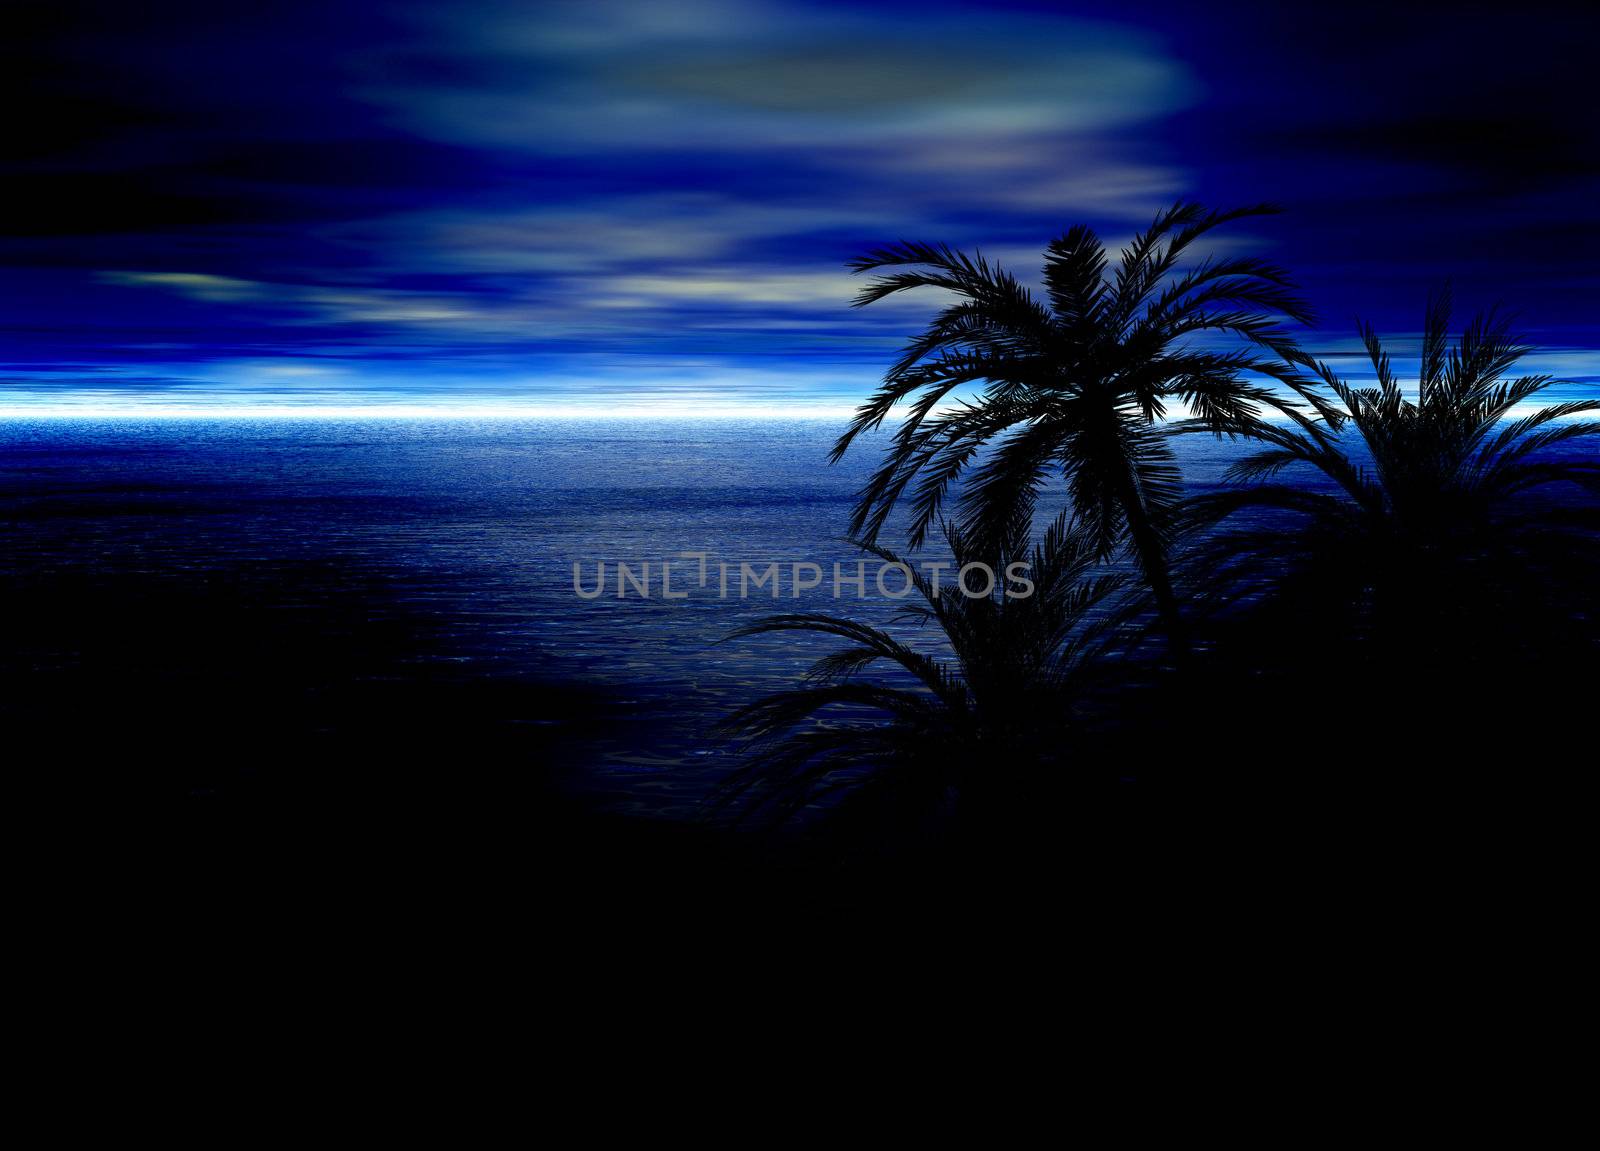 Blue Seascape Horizon With Palm Tree Silhouettes by bobbigmac